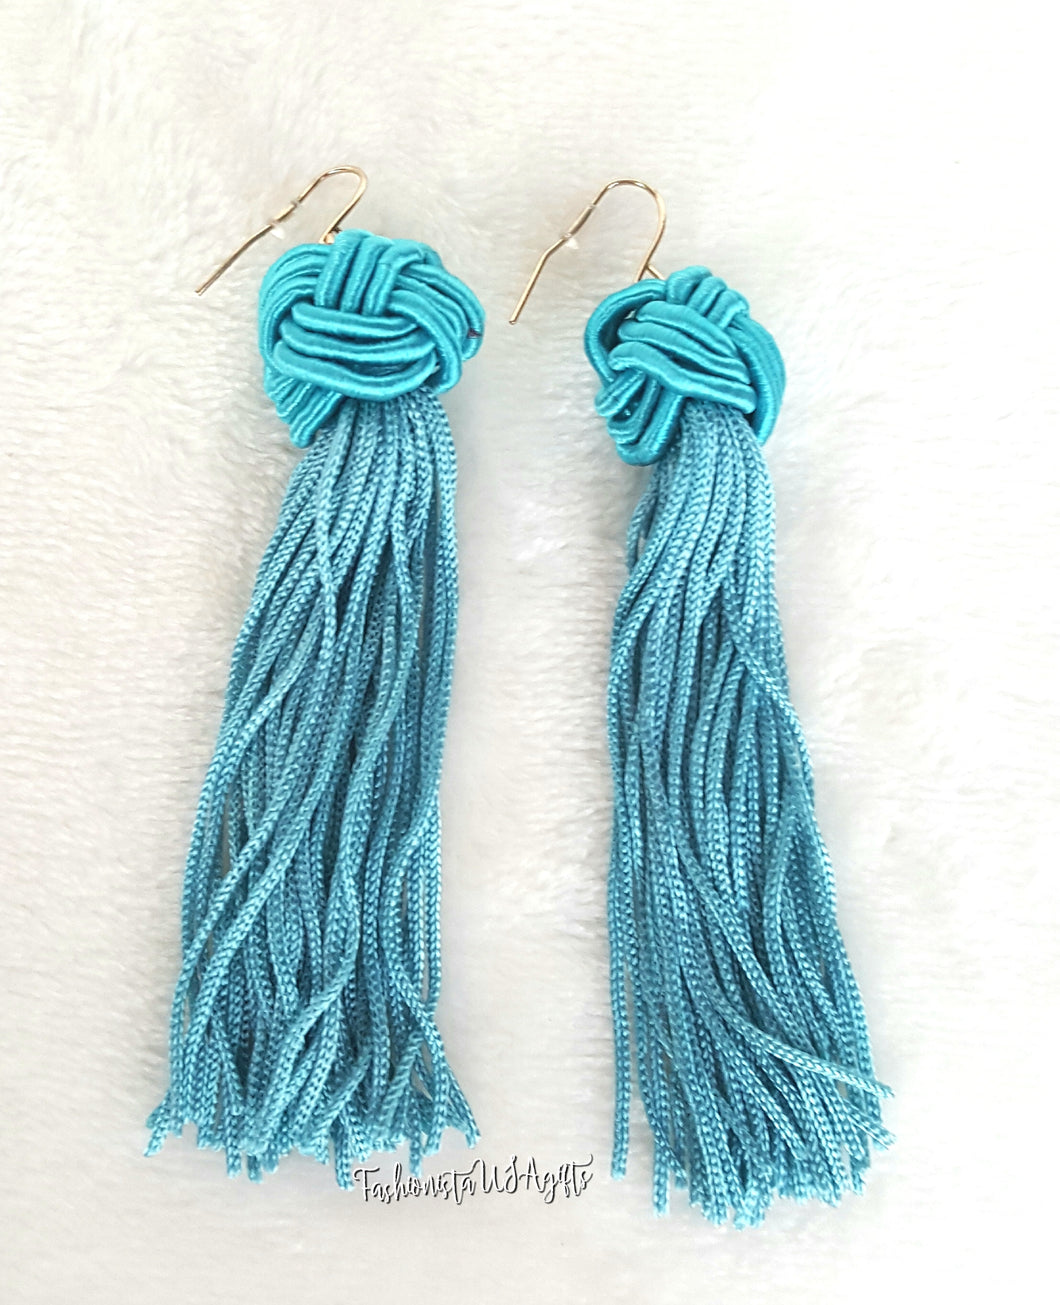 Earrings Knotted Tassel Turquoise, Boho Earrings, Beach Earrings, Chic Fashion Earrings, Statement Earring, Turquoise Jewery,Gifts for Her - Urban Flair USA